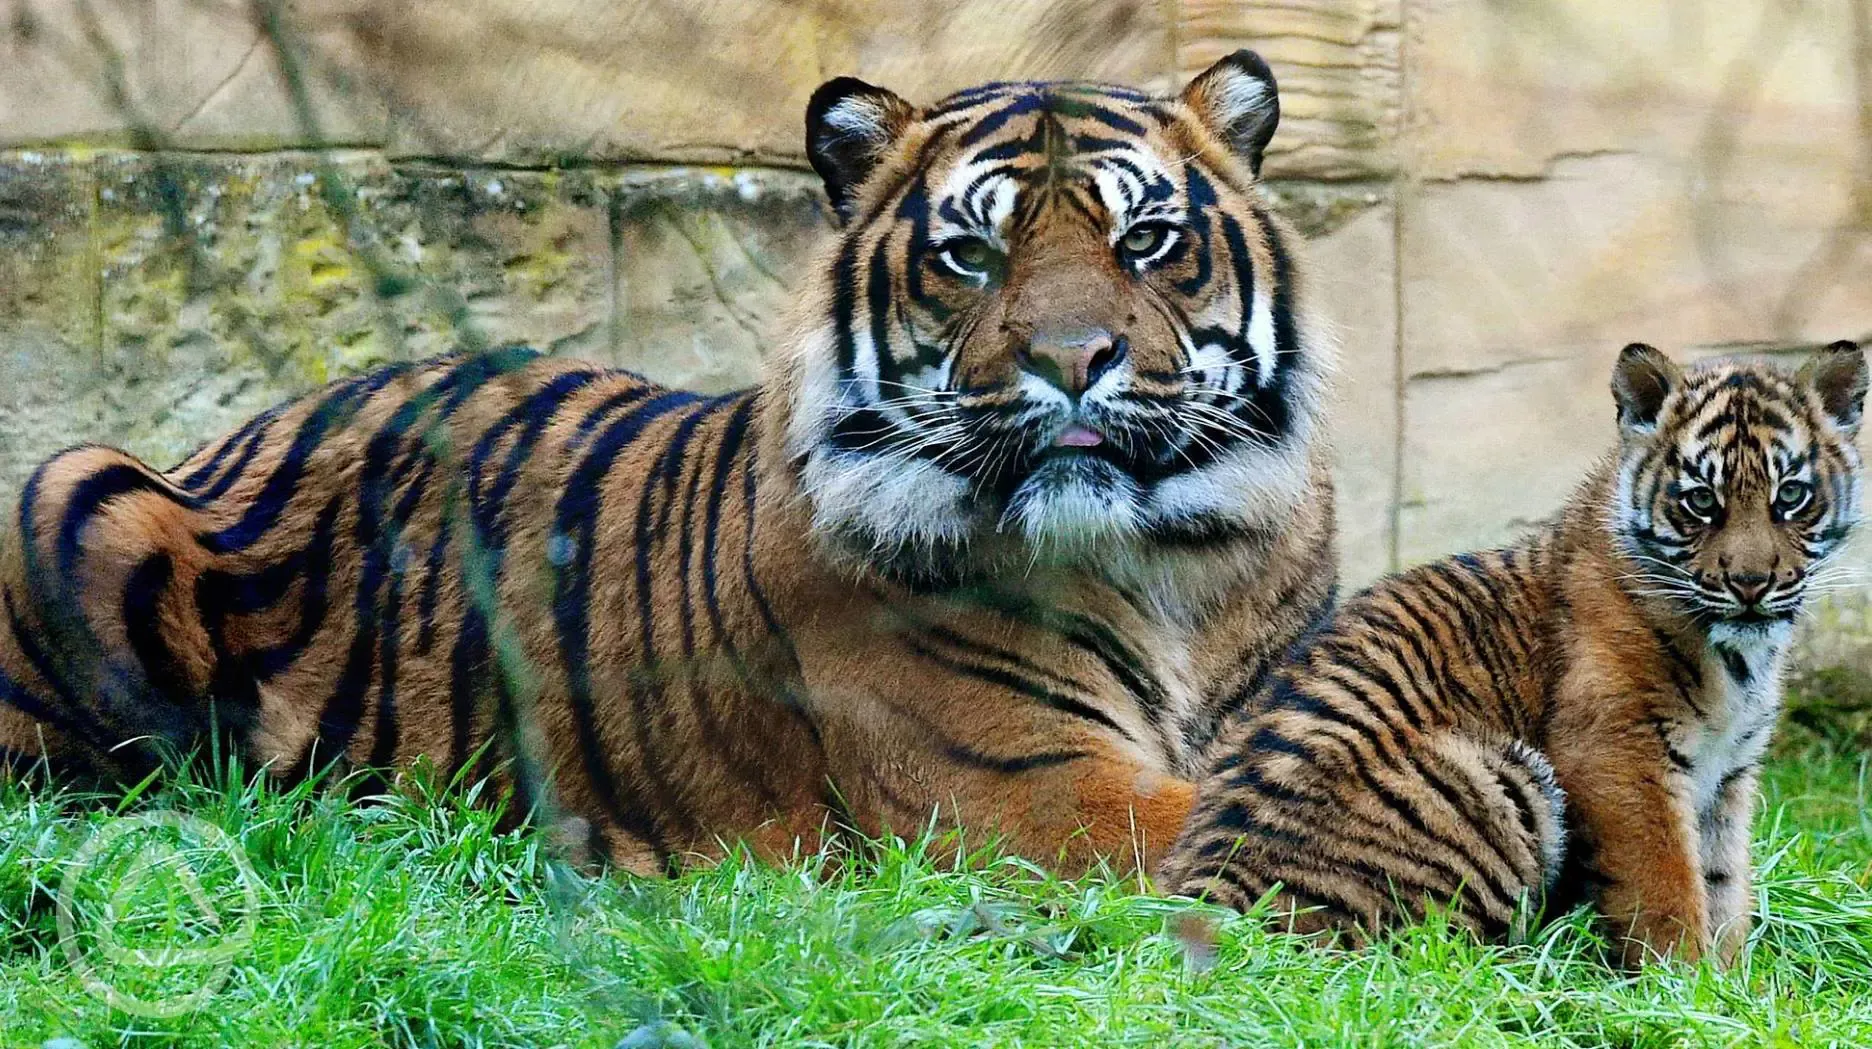 Friendly tigers in Flamingo Land Zoo